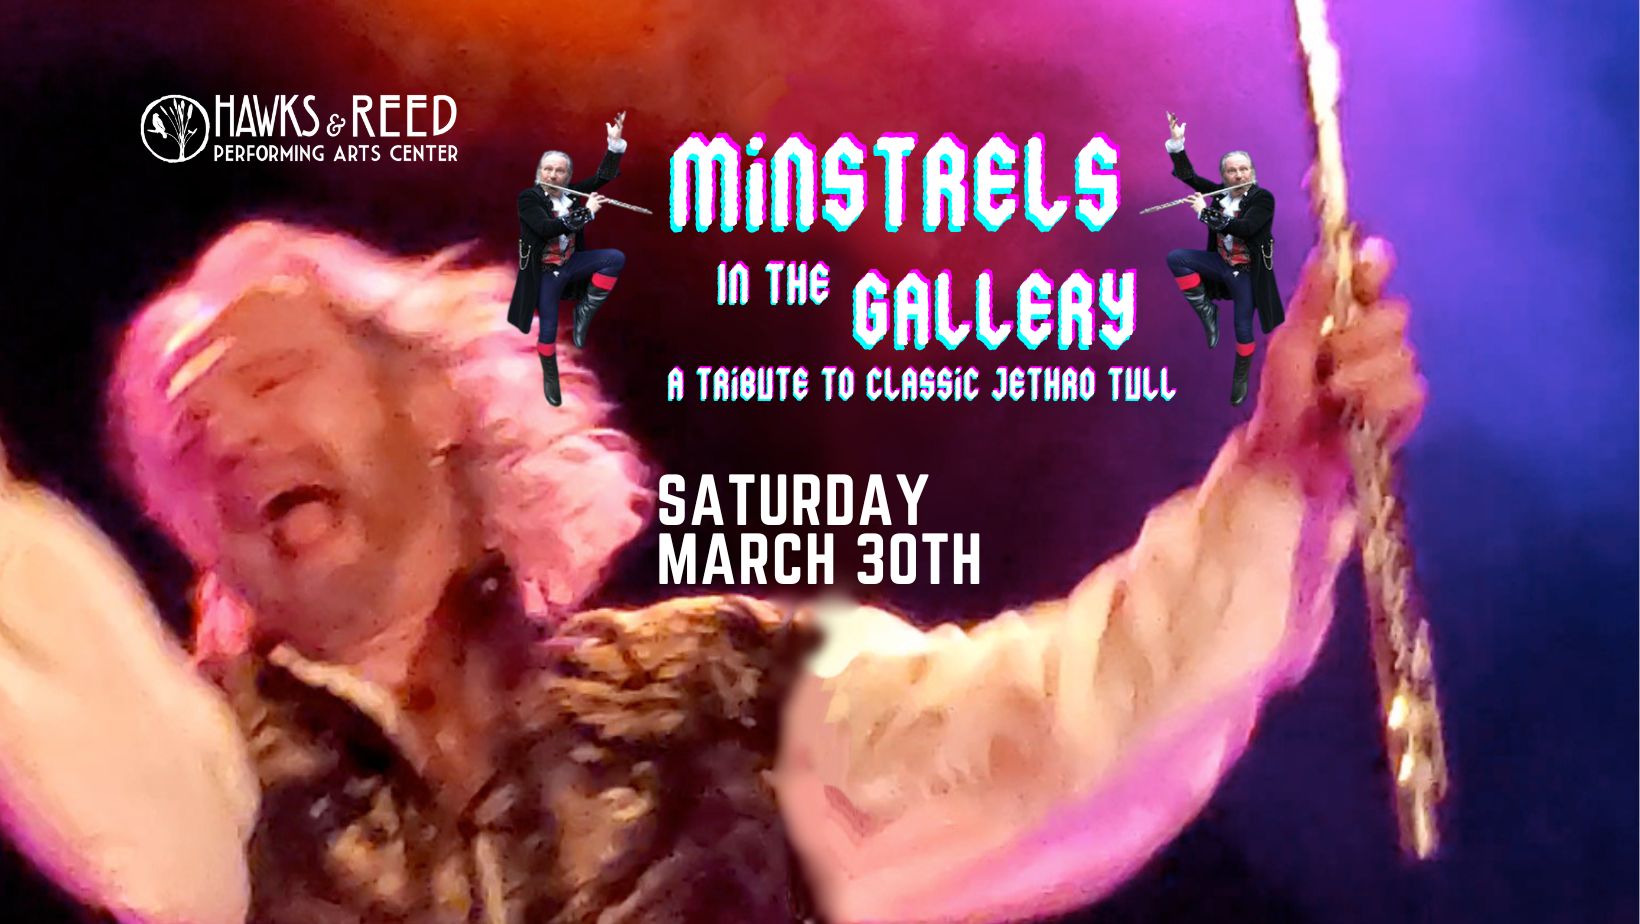 Minstrels In the Gallery – A Tribute To Classic Jethro Tull